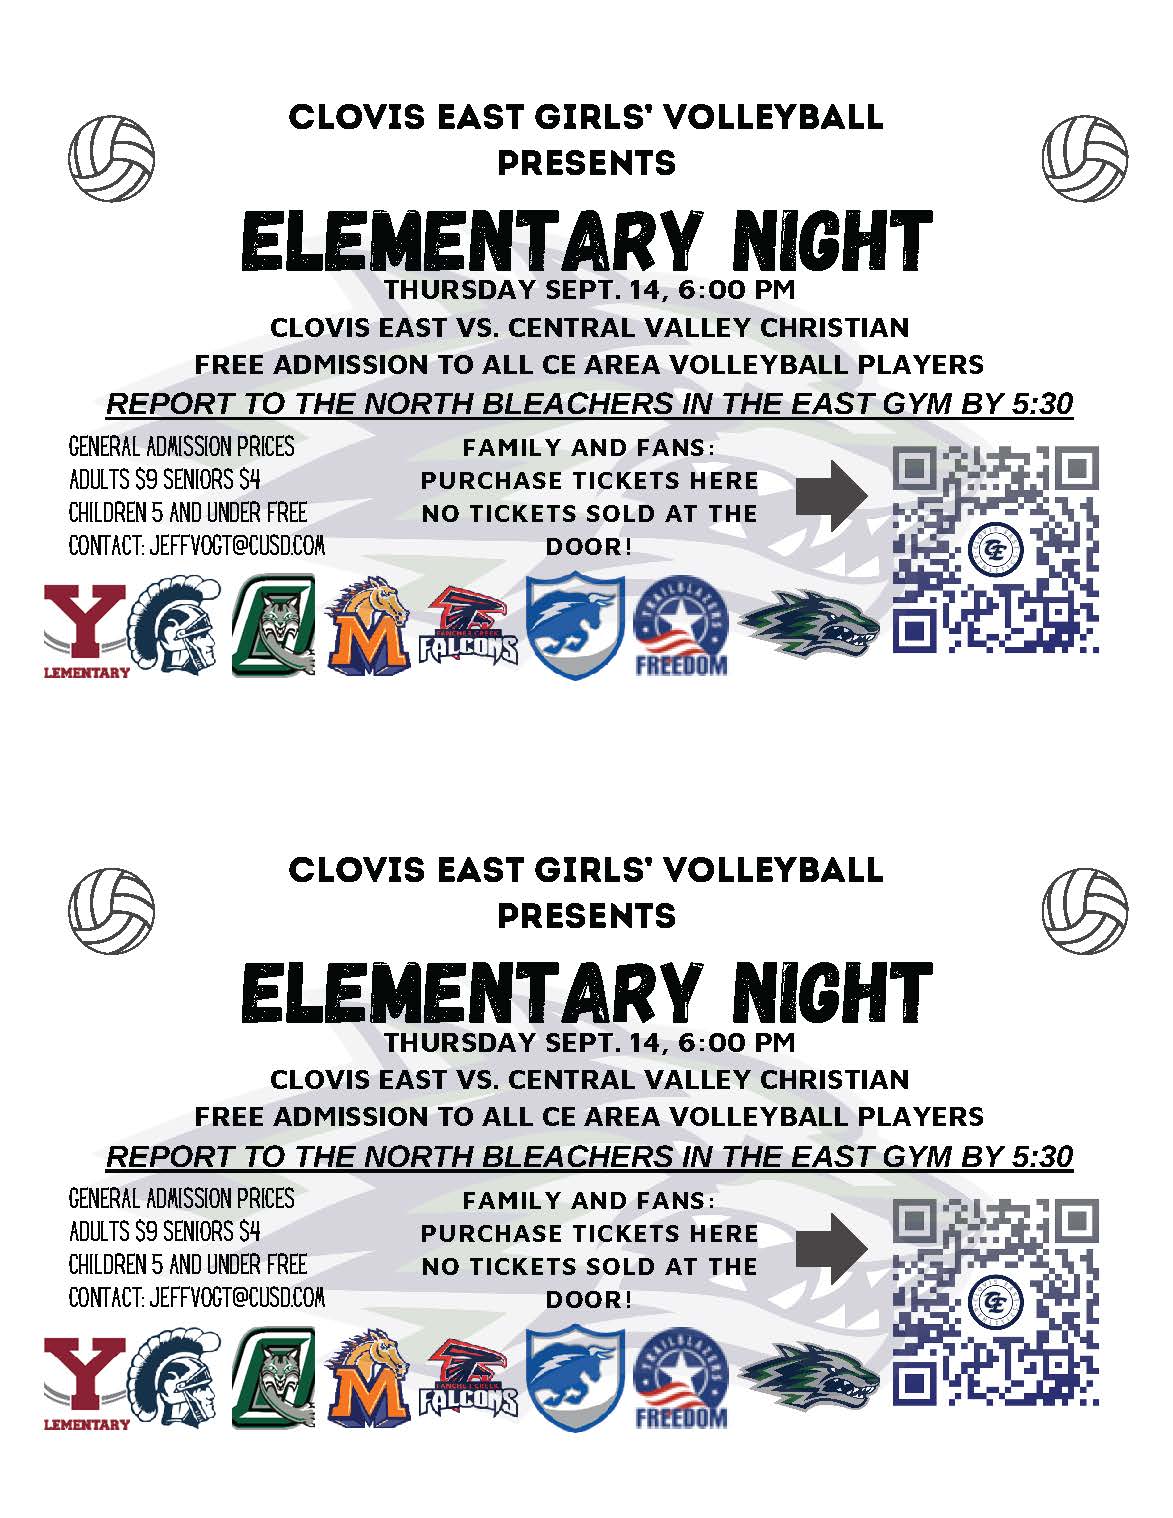 Image for: Girls Volleyball Elementary Night